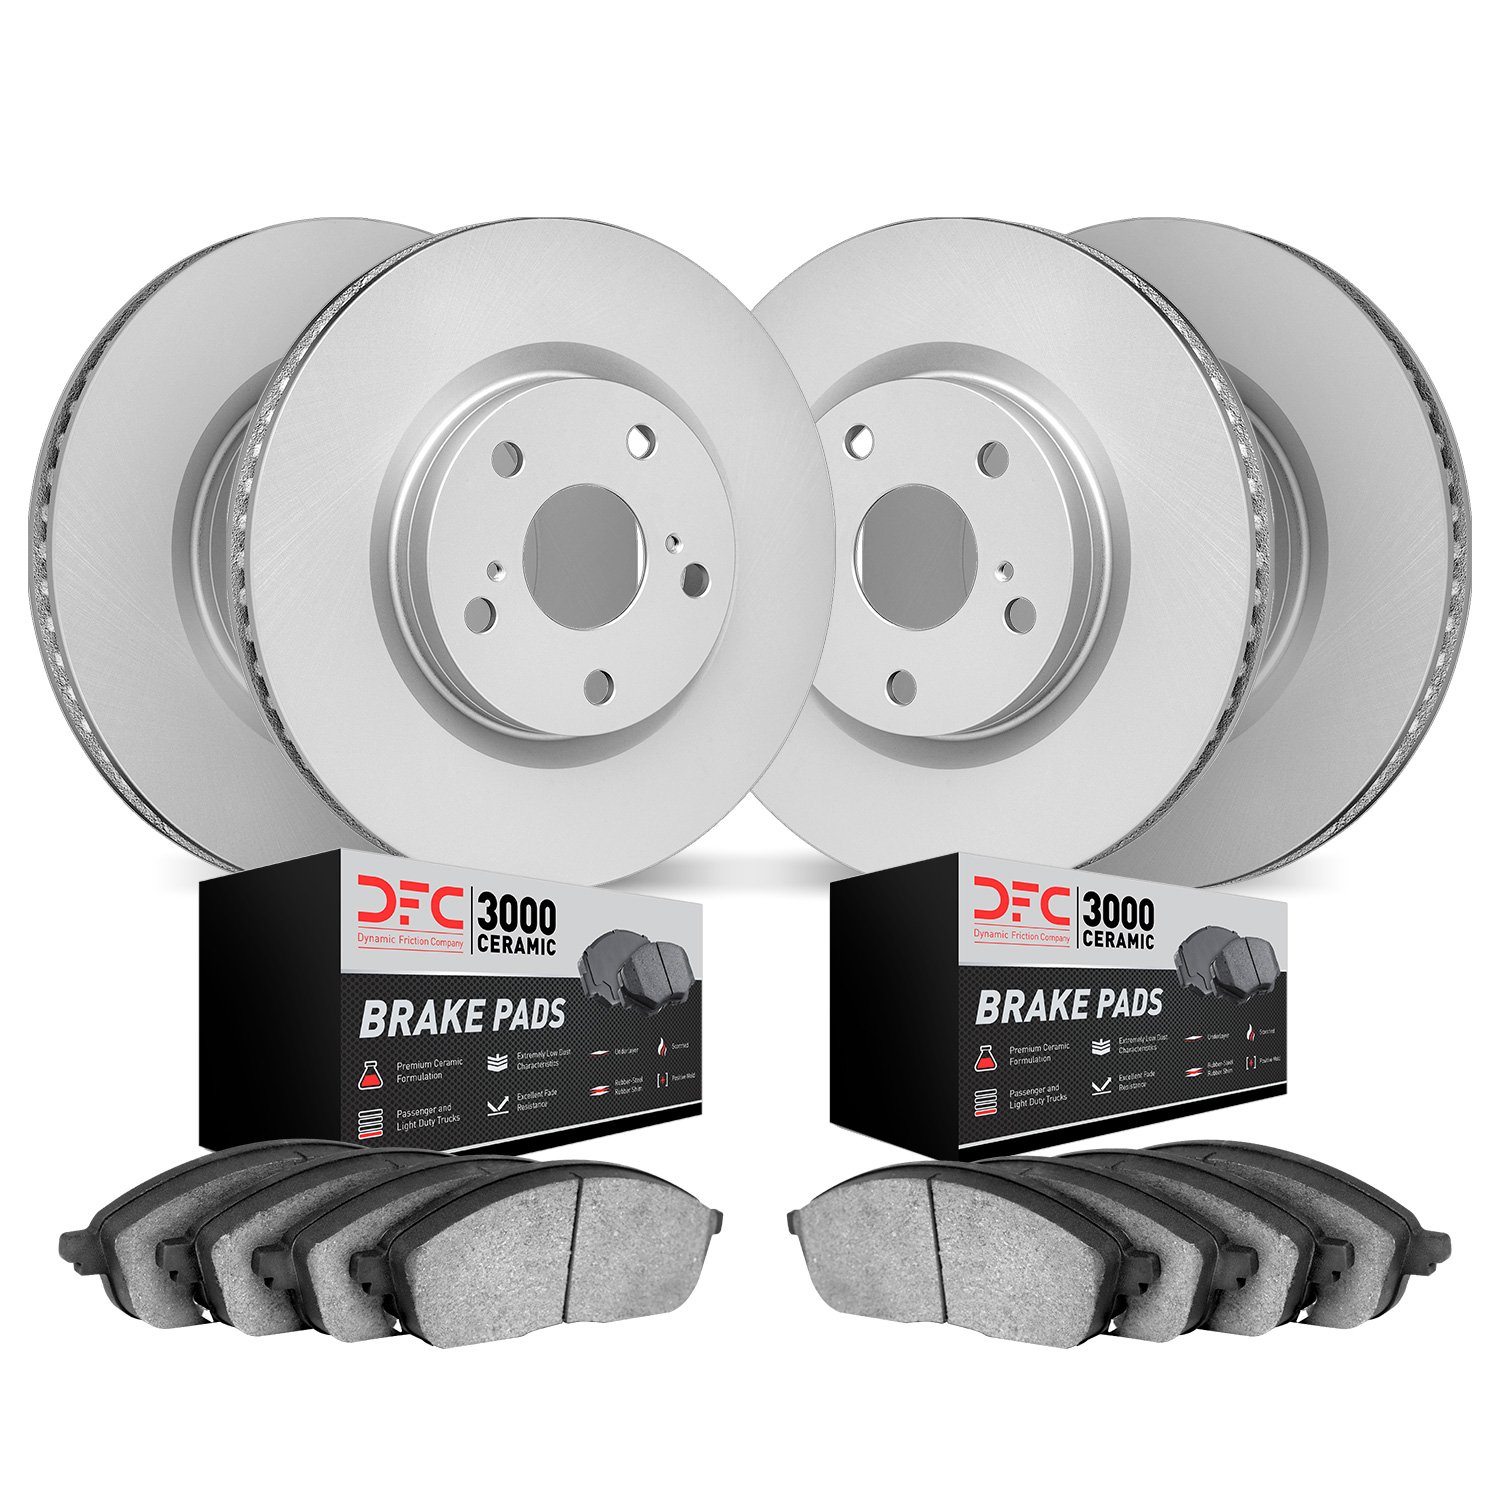 4304-68003 Geospec Brake Rotors with 3000-Series Ceramic Brake Pads Kit, 2003-2008 Infiniti/Nissan, Position: Front and Rear